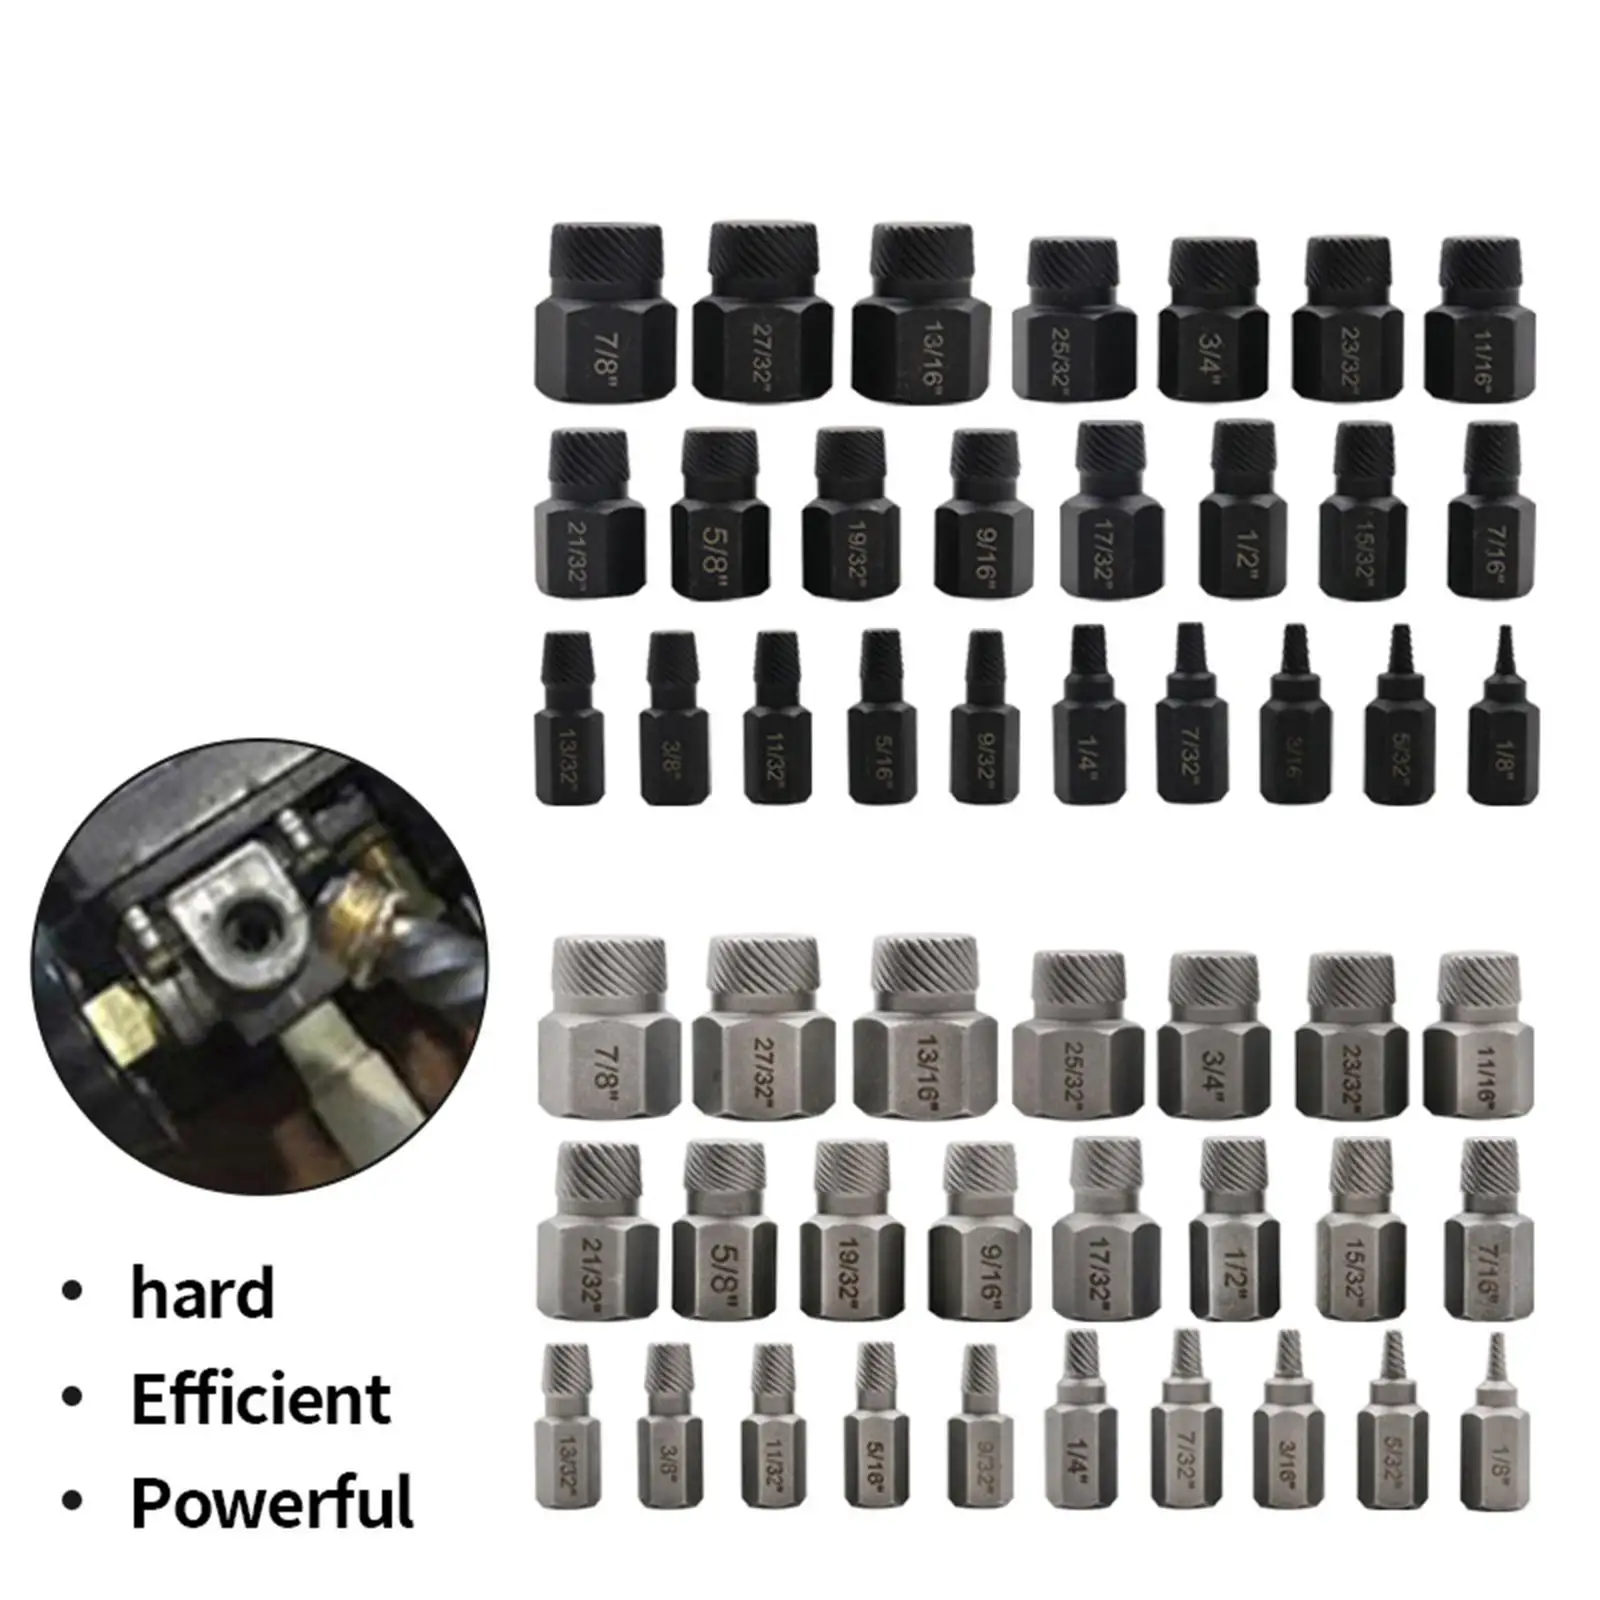 25Pcs Steel Screw Remover Tool Bolt Extractor Set Hexagon Handle Nut Remover Stripped Bolts Remover for Removing Broken Bolts